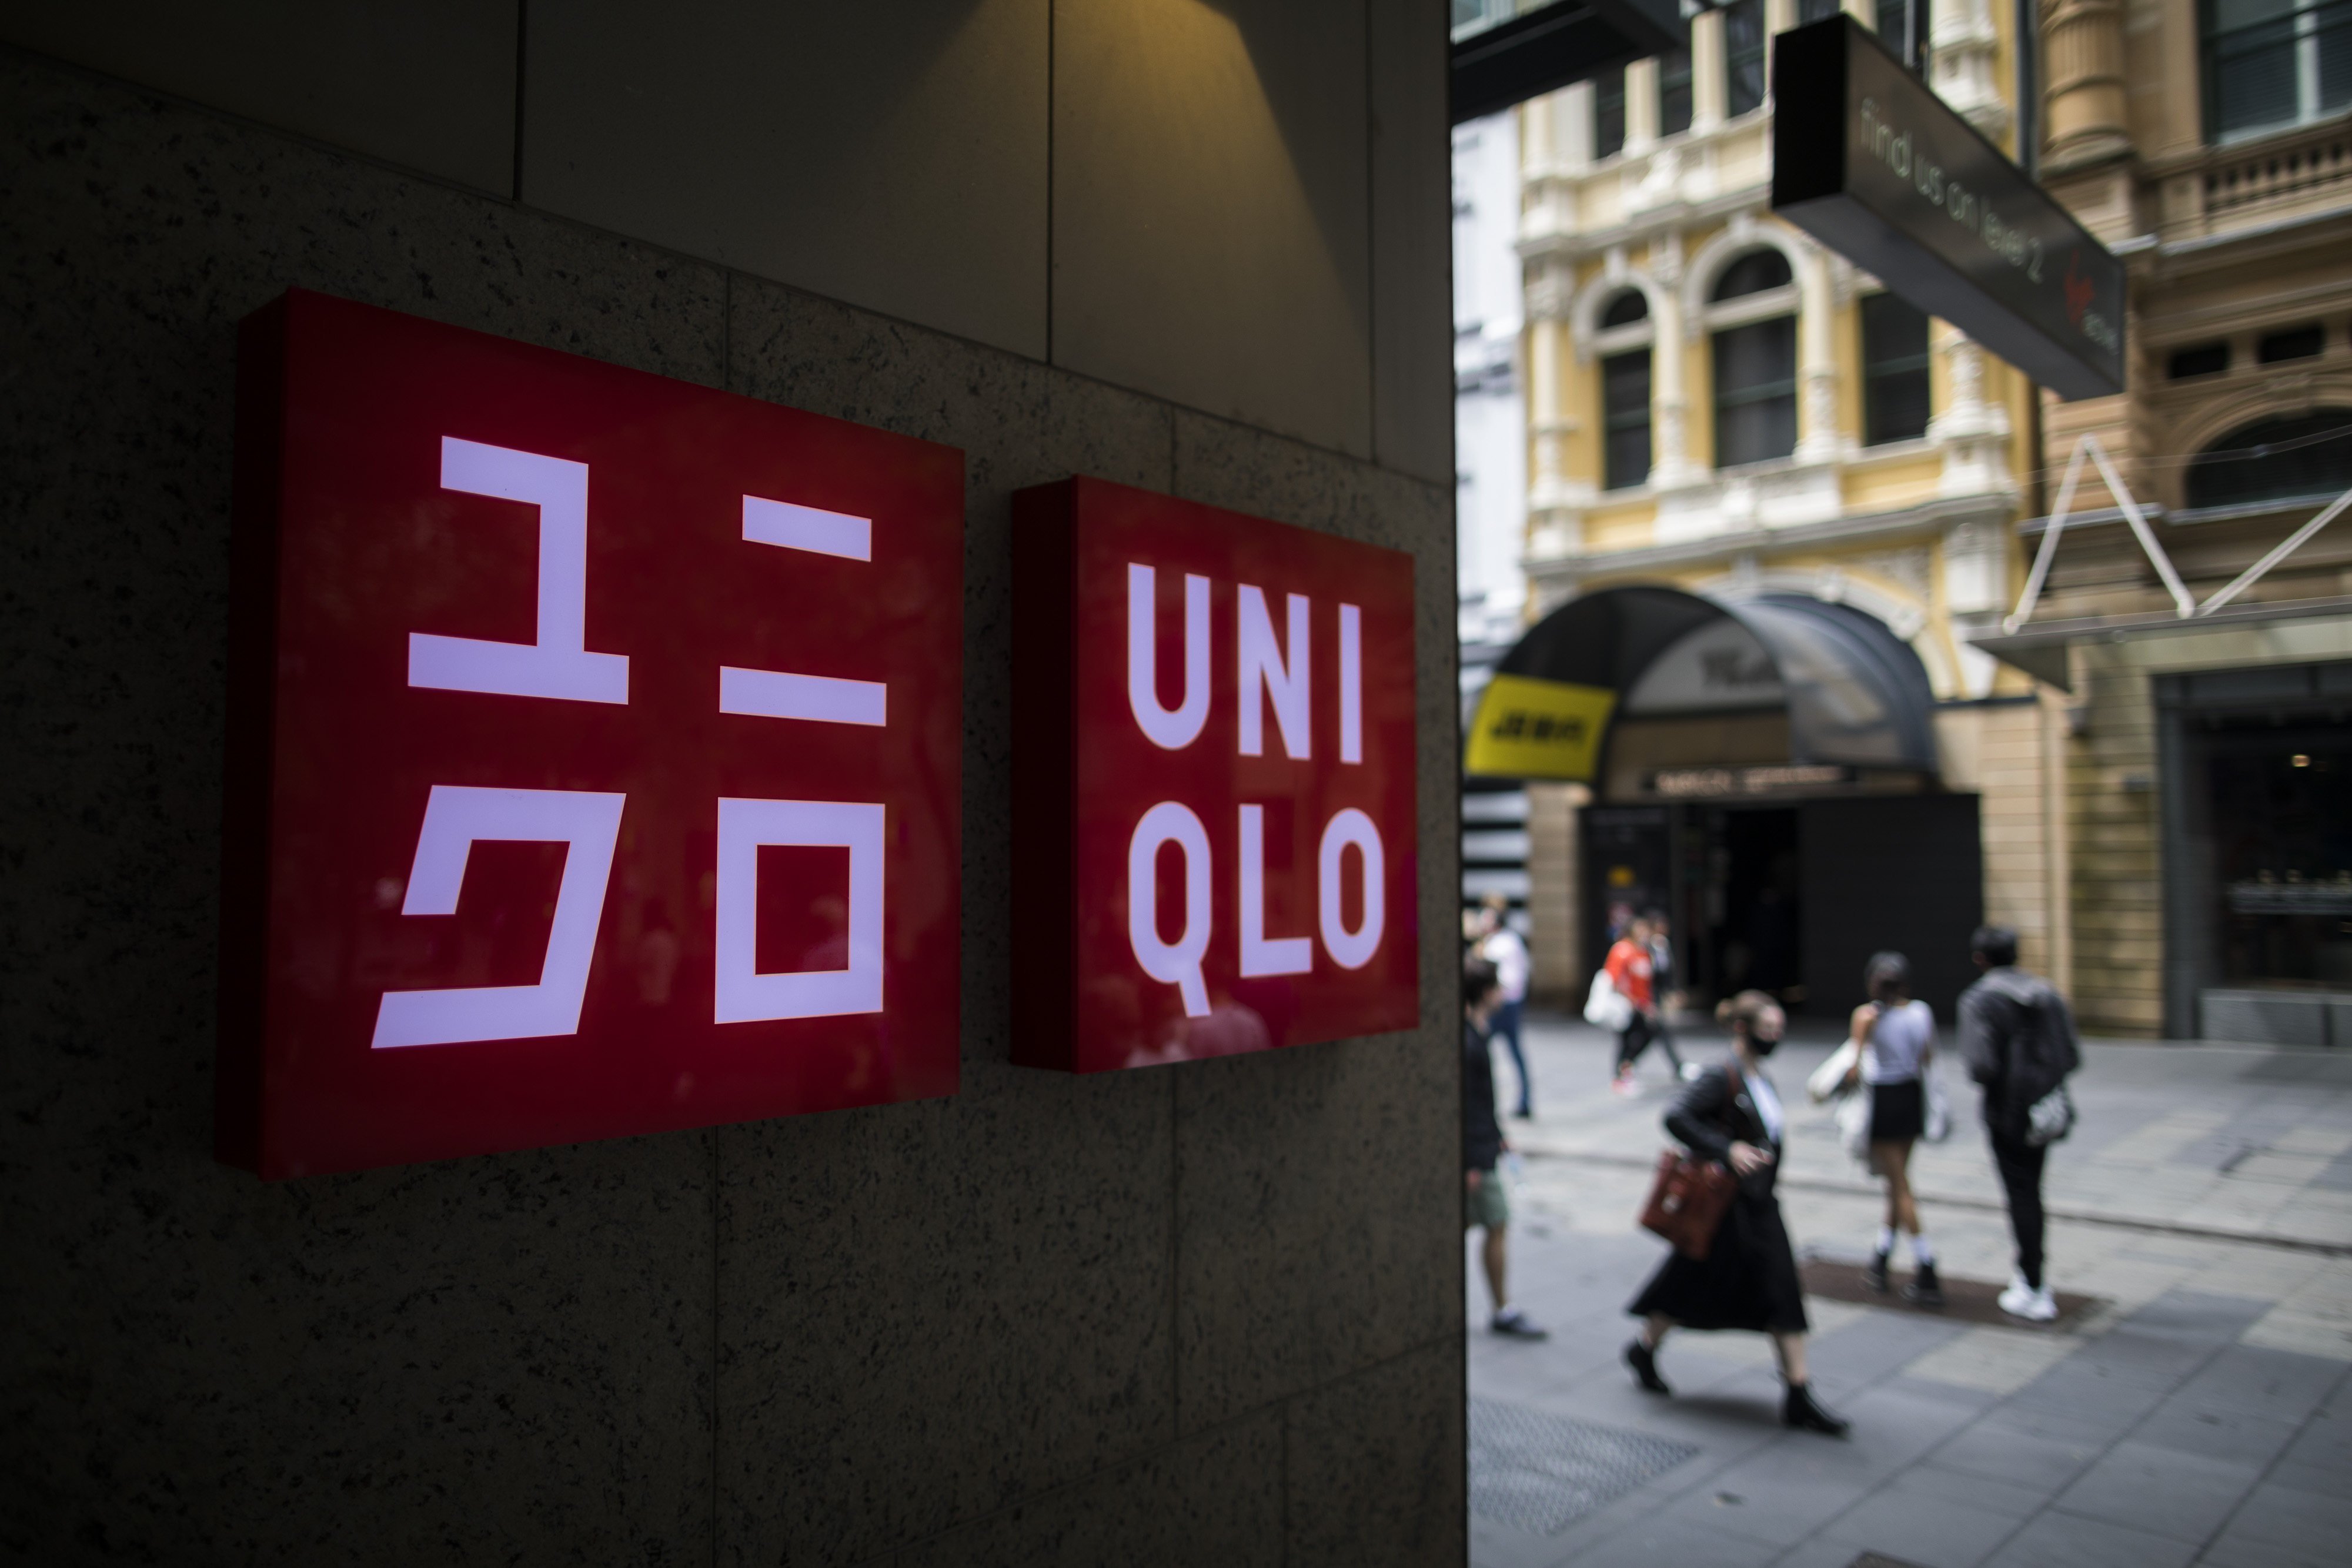 Several Japanese brands, including Uniqlo have reported a recent surge in sales in South Korea, following a shift in political ties. File photo: Bloomberg